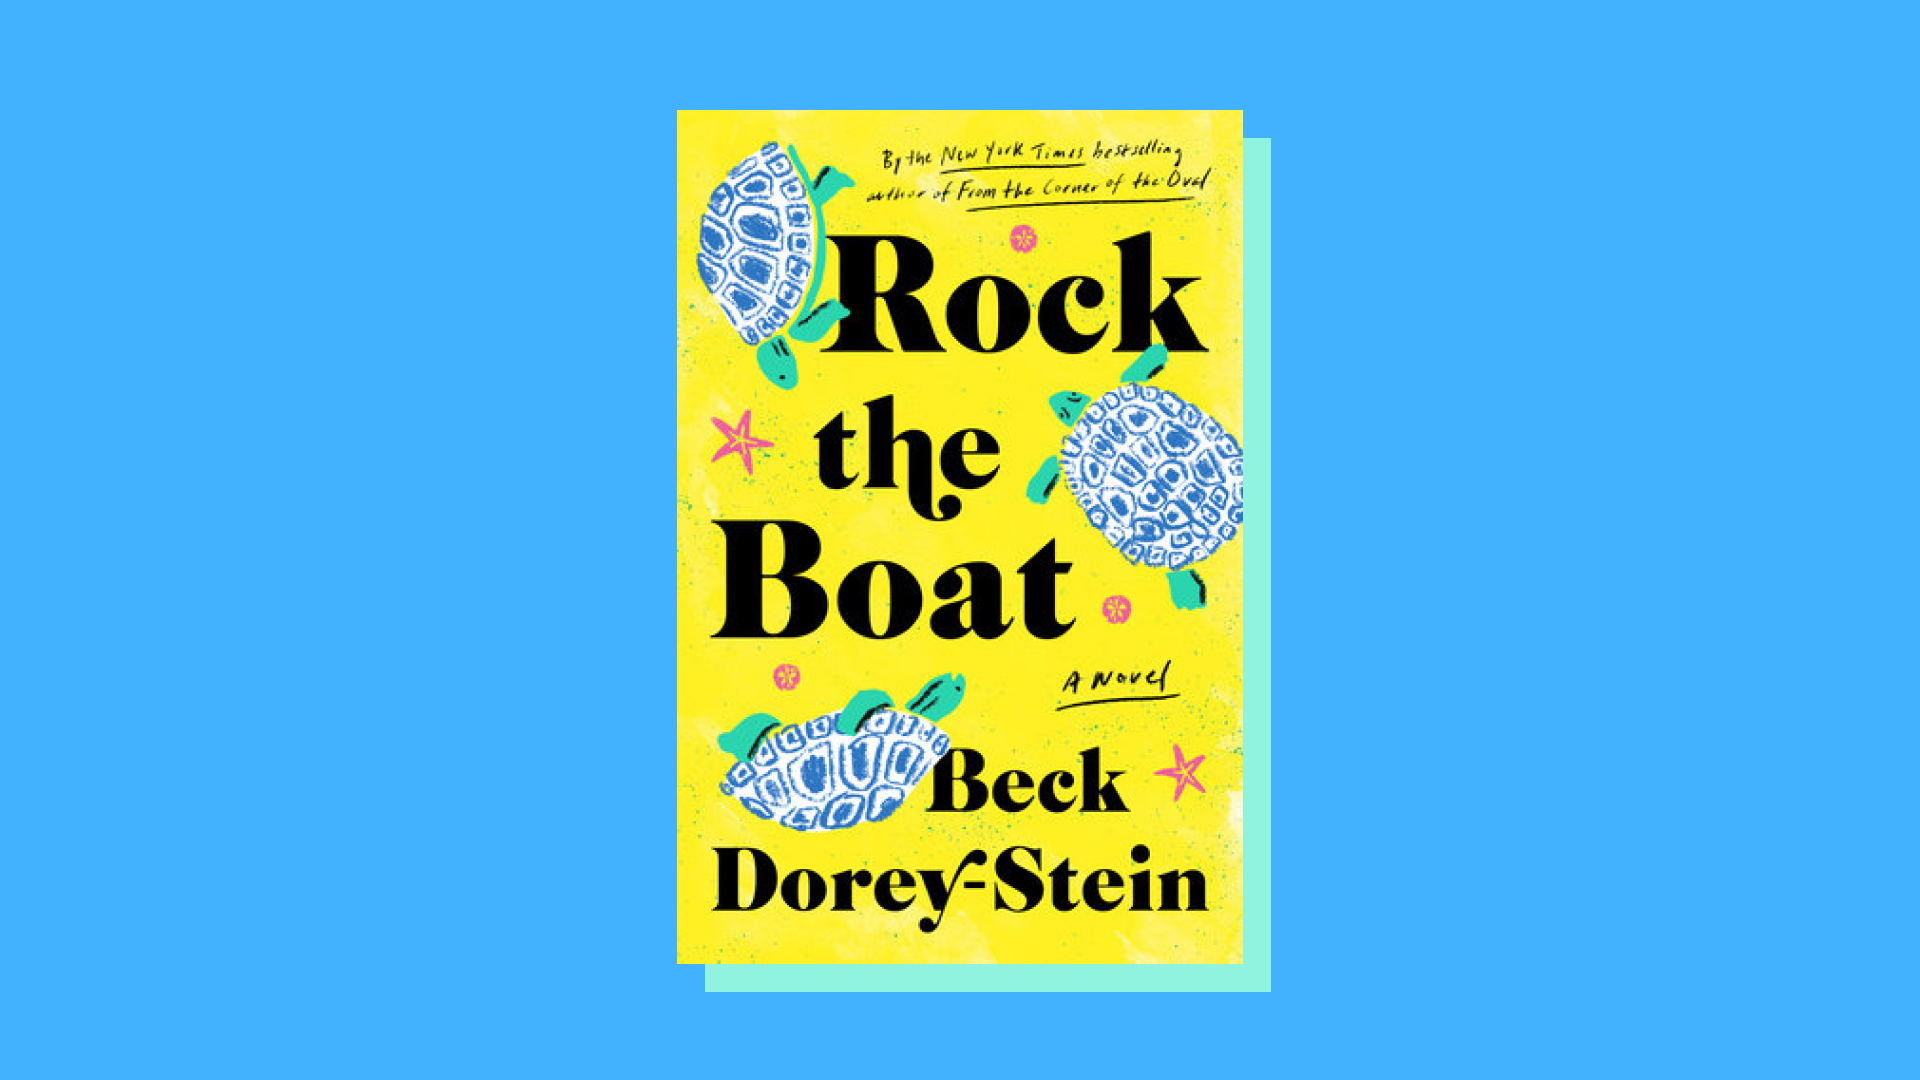 “Rock the Boat” by Beck Dorey-Stein